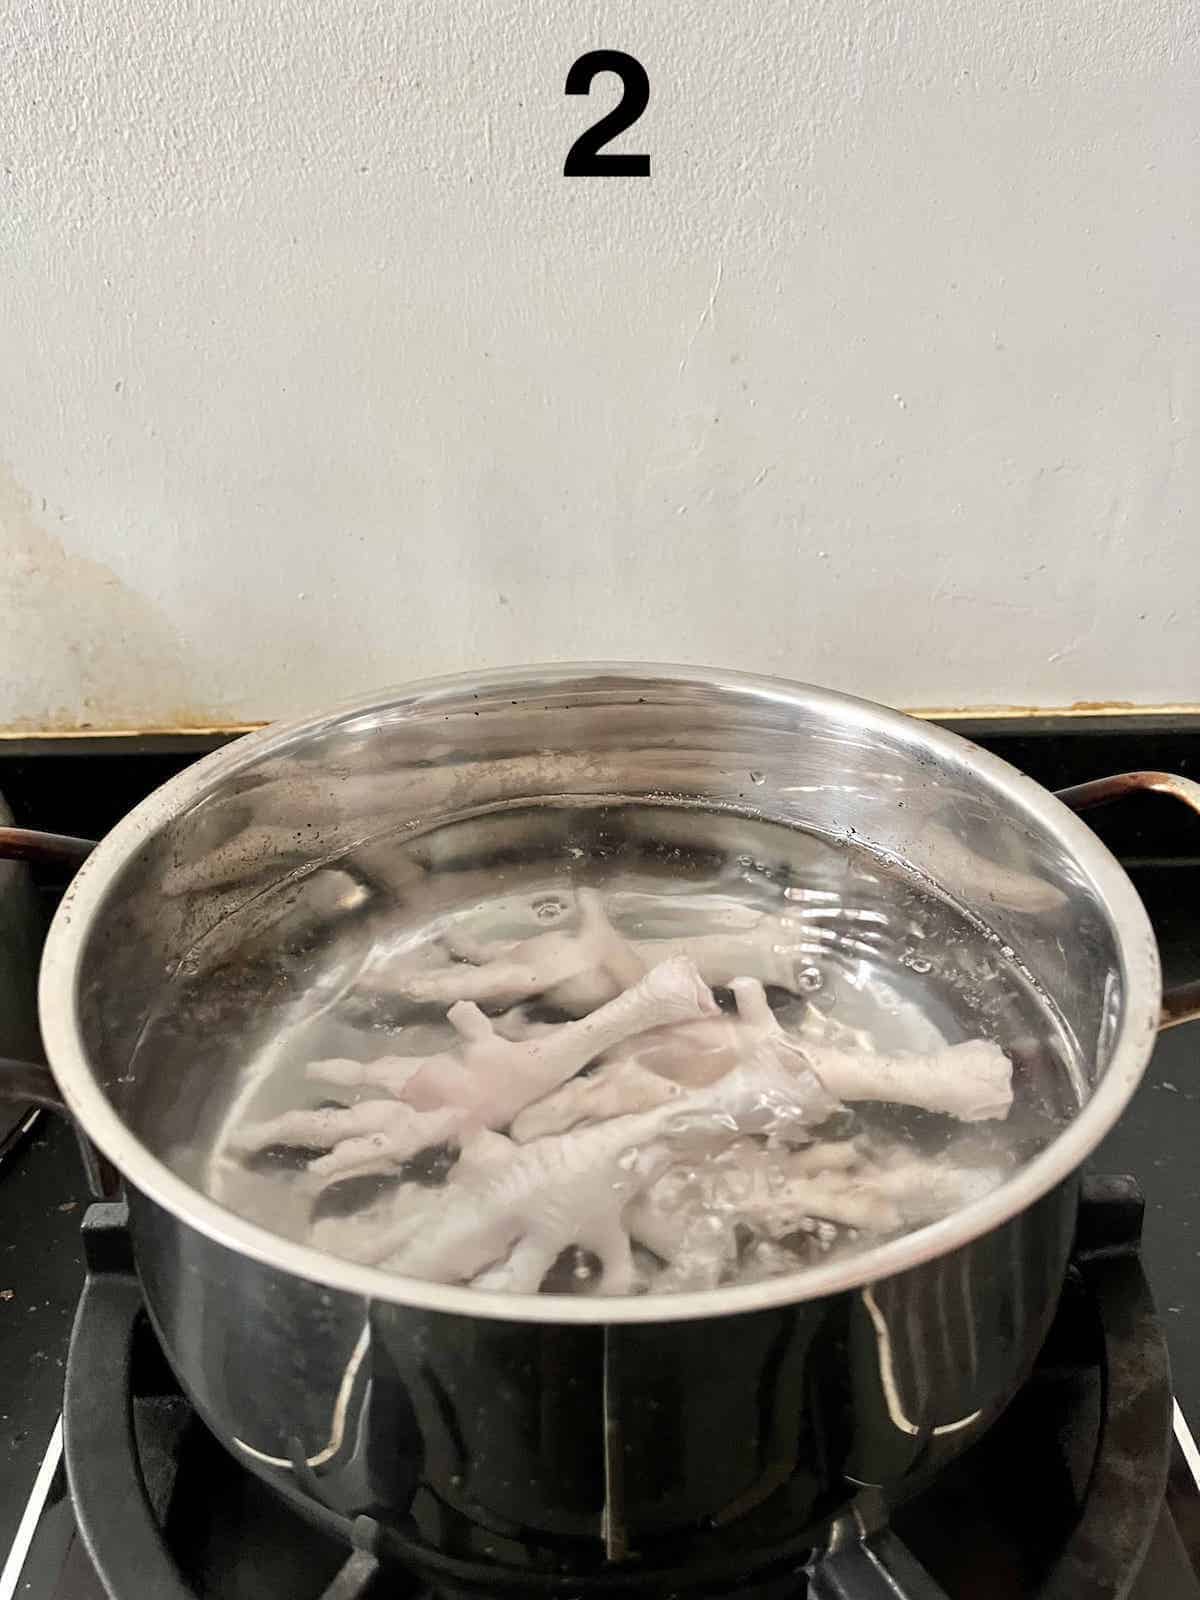 A pot of chicken feet being blanched in cold water.